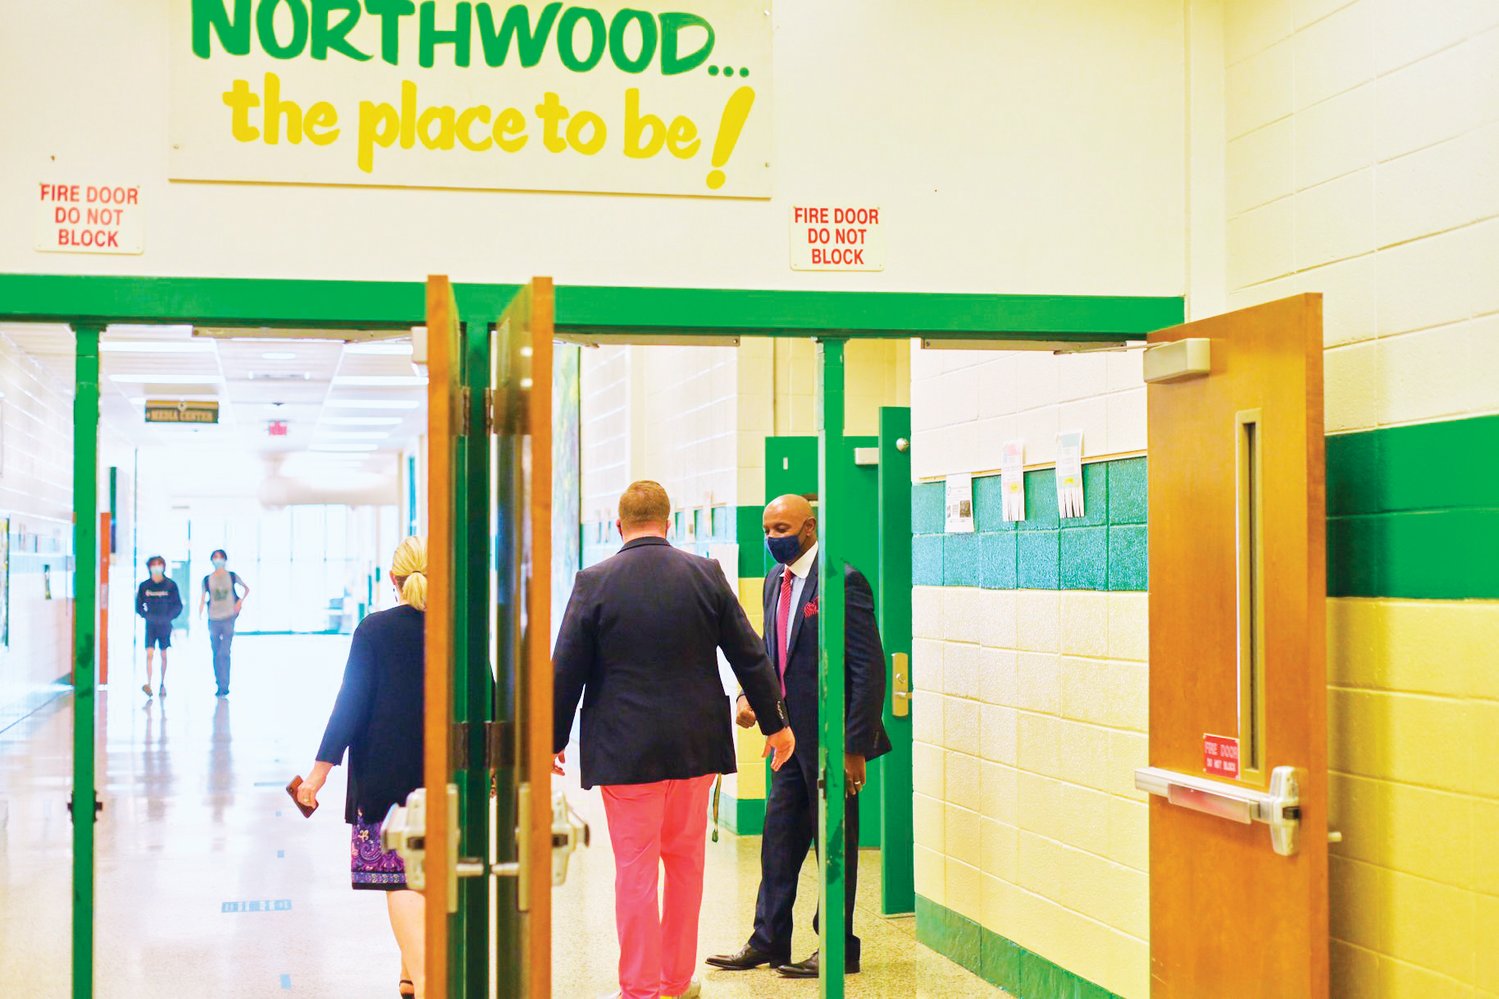 Jackson visited Northwood High School on Tuesday morning for the second day of school. CCS is requiring universal indoor masking at its campuses.